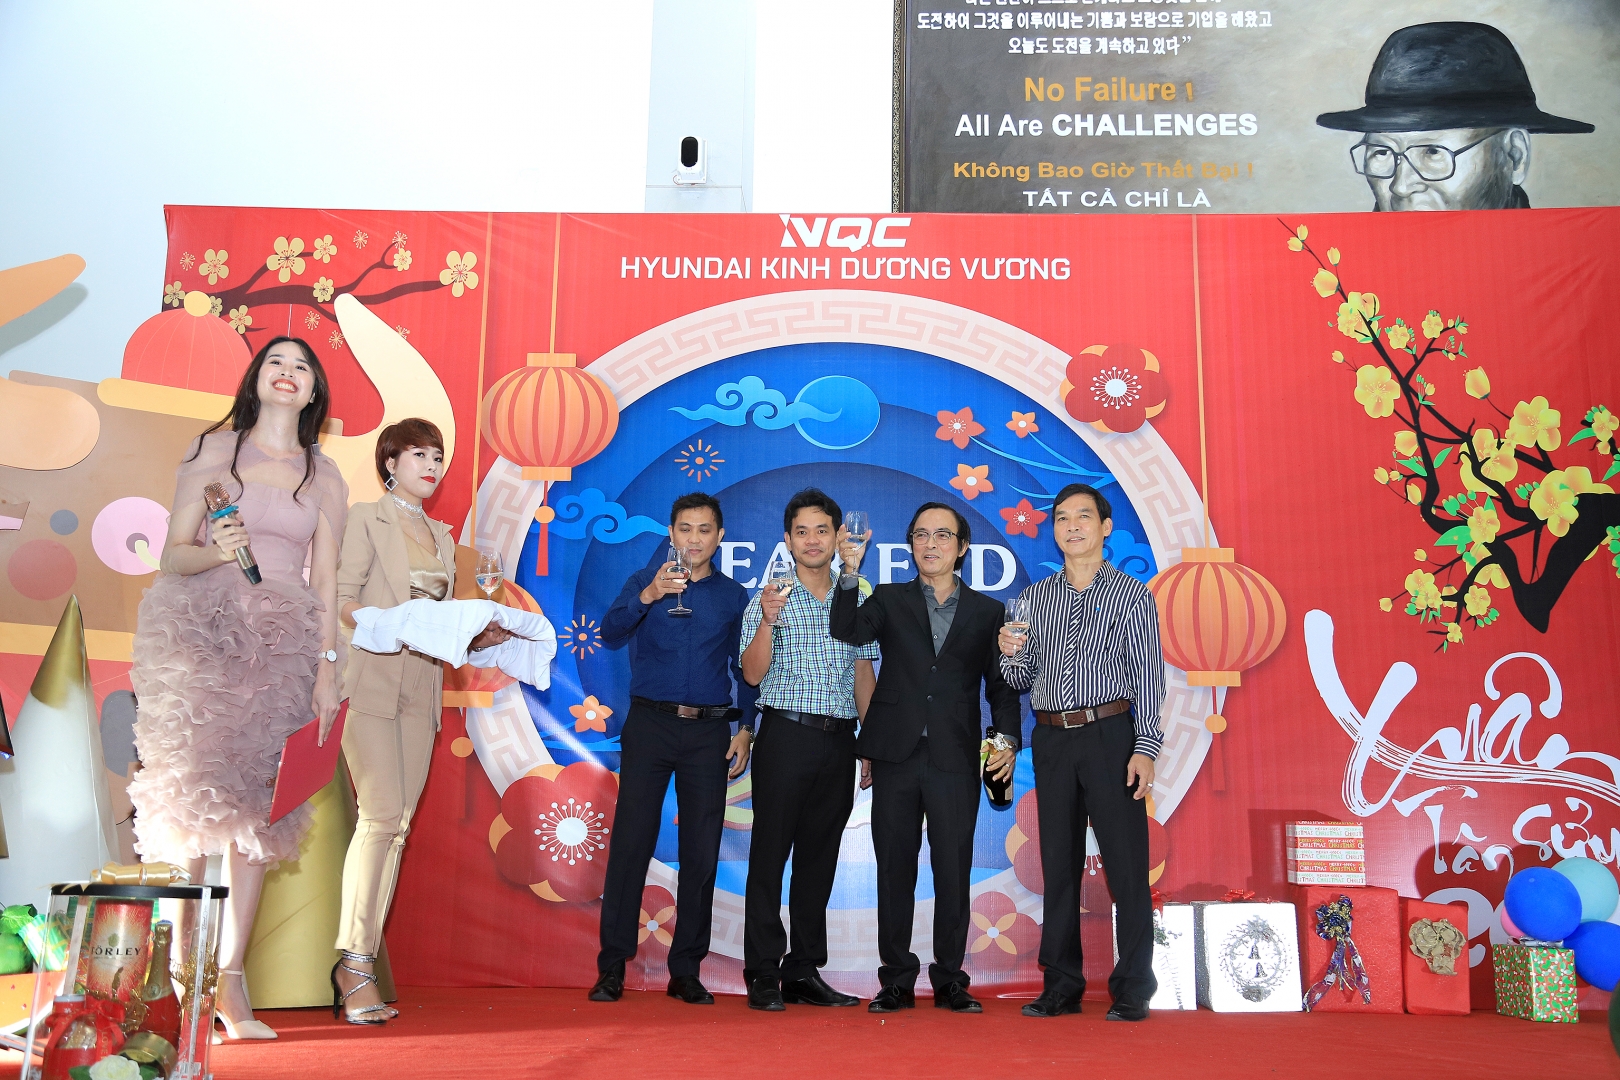 YEAR END PARTY NGUYEN QUANG COMPANY